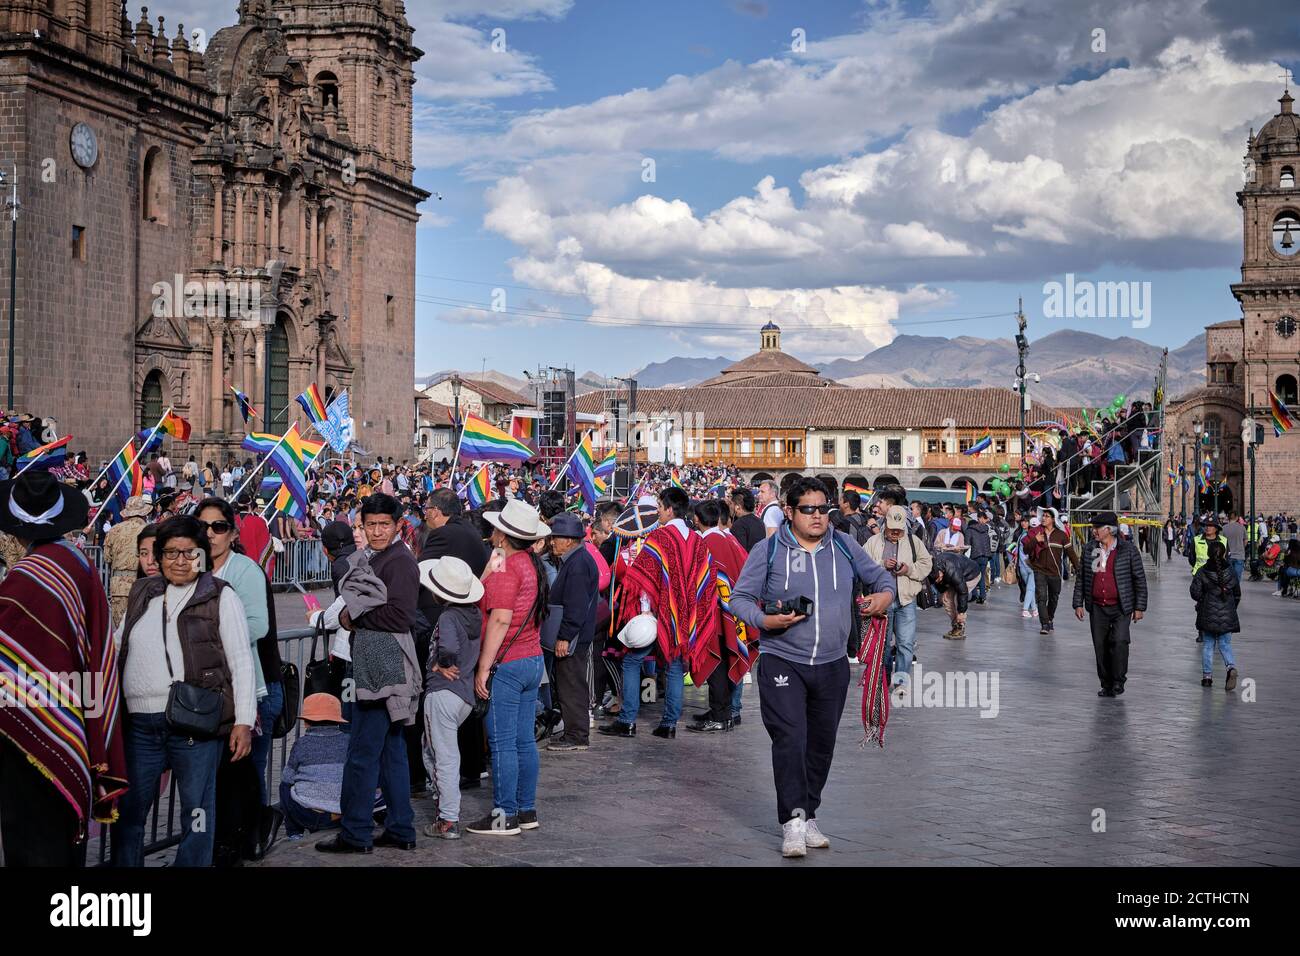 A crowd of spectators line the procession route during the Inti Raymi'rata sun festival over the winter solstice, Cusco, Peru Stock Photo